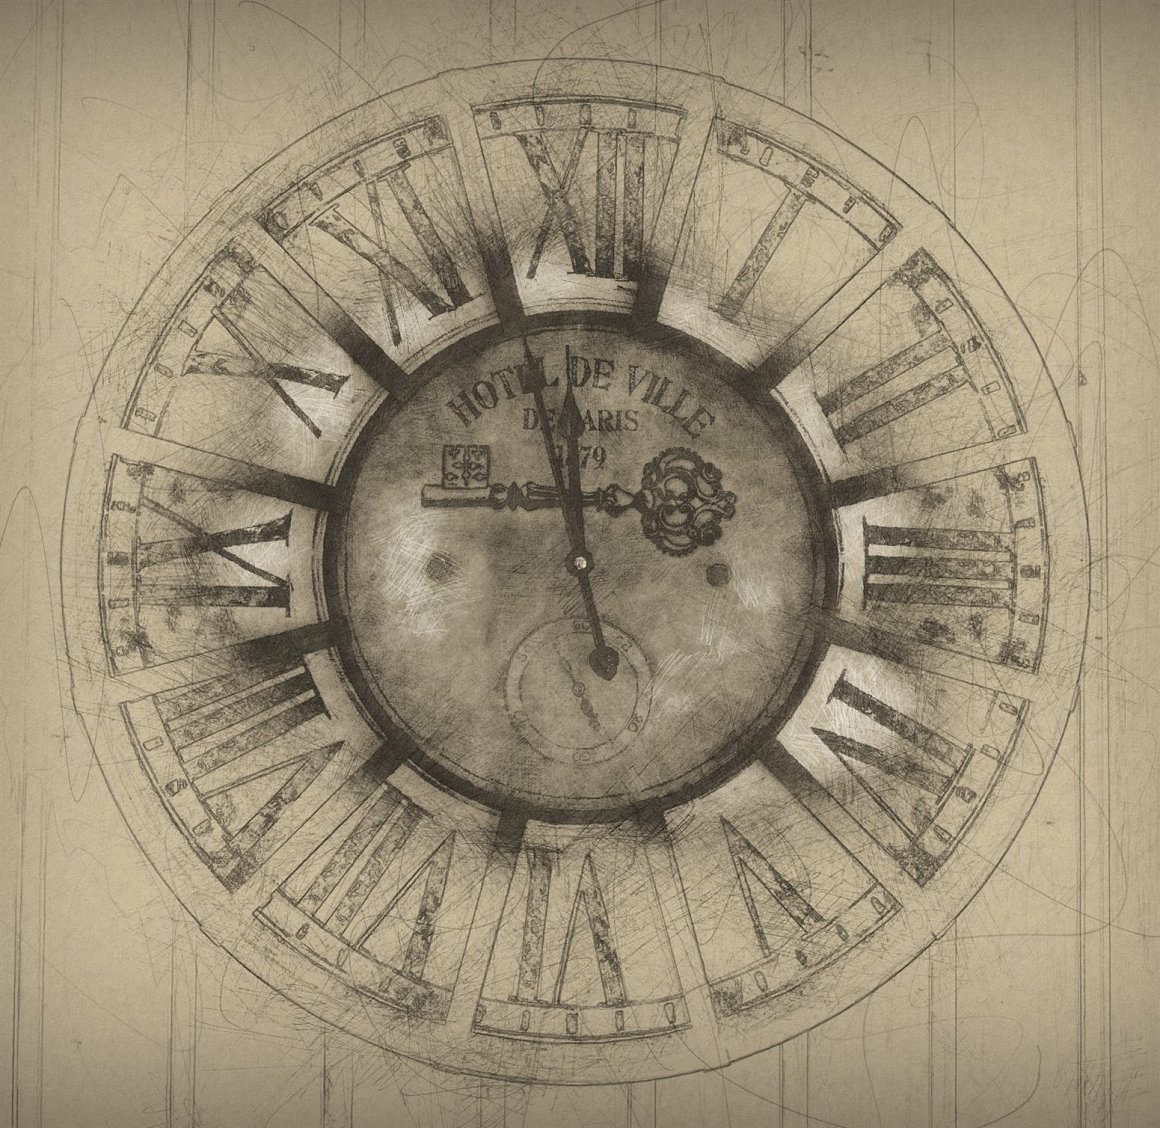 Image of a clock with different Roman numerals.